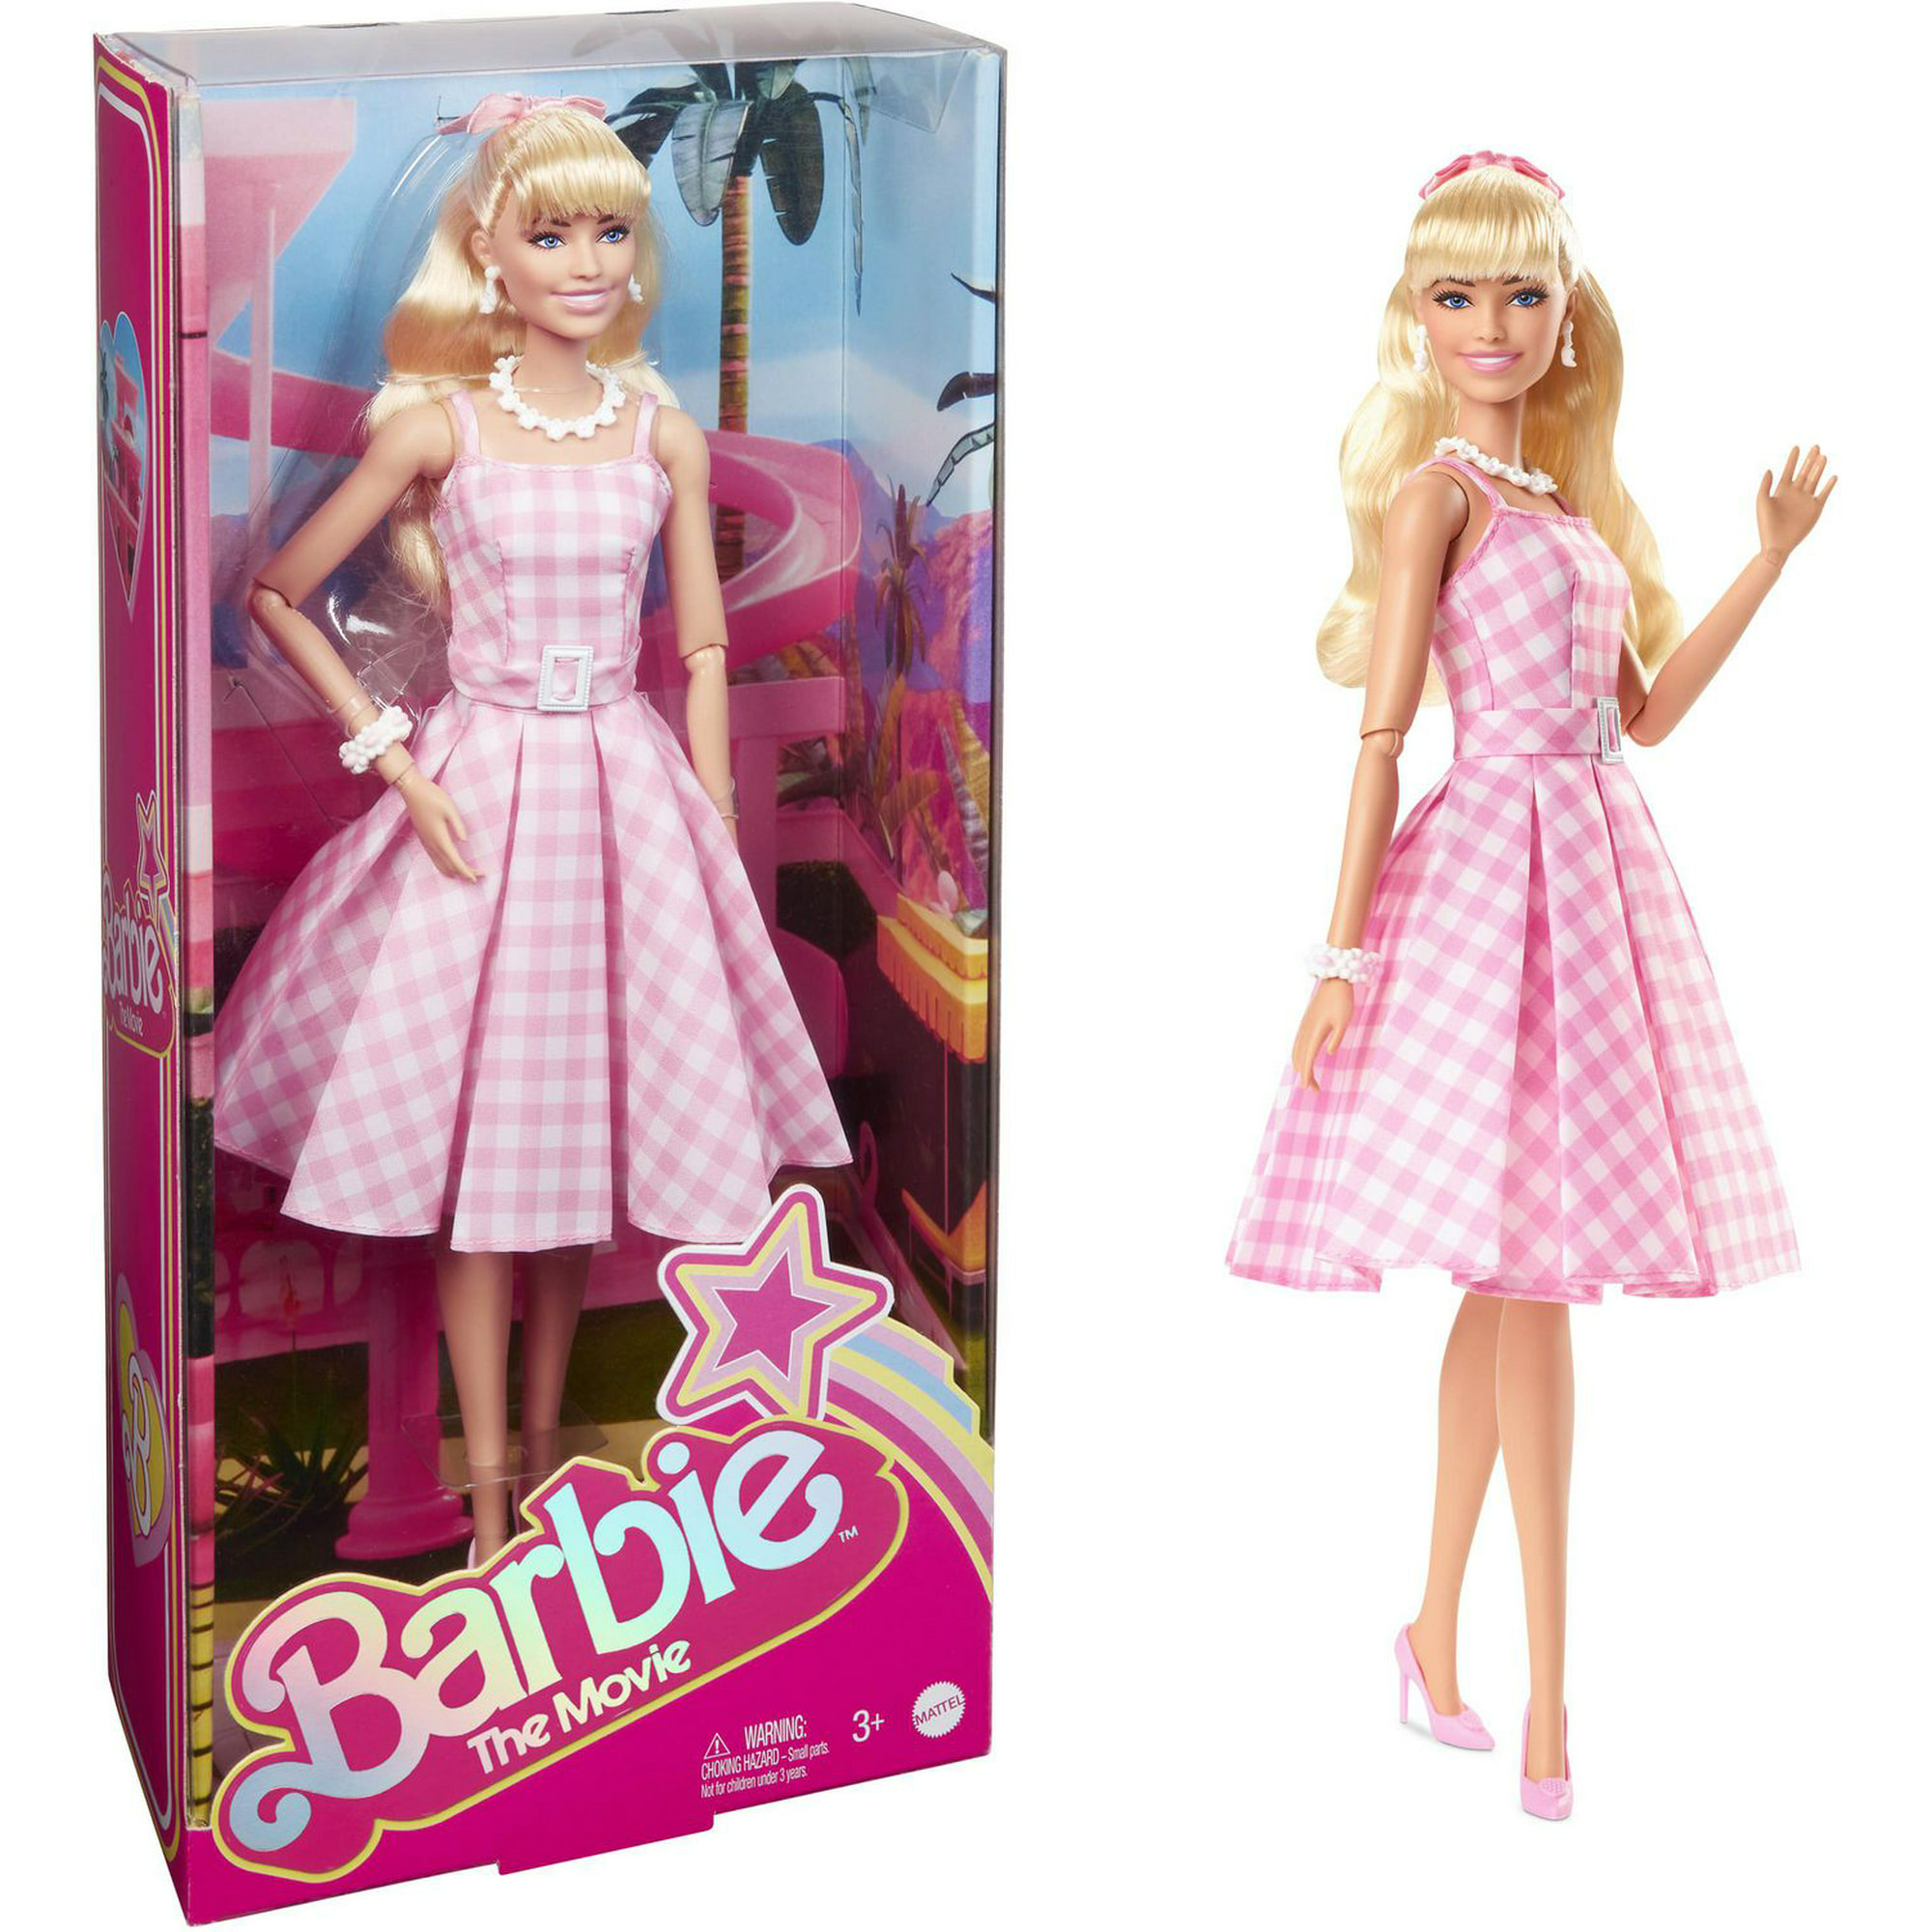 Barbie The Movie Collectible Doll, Margot Robbie as Barbie in Pink